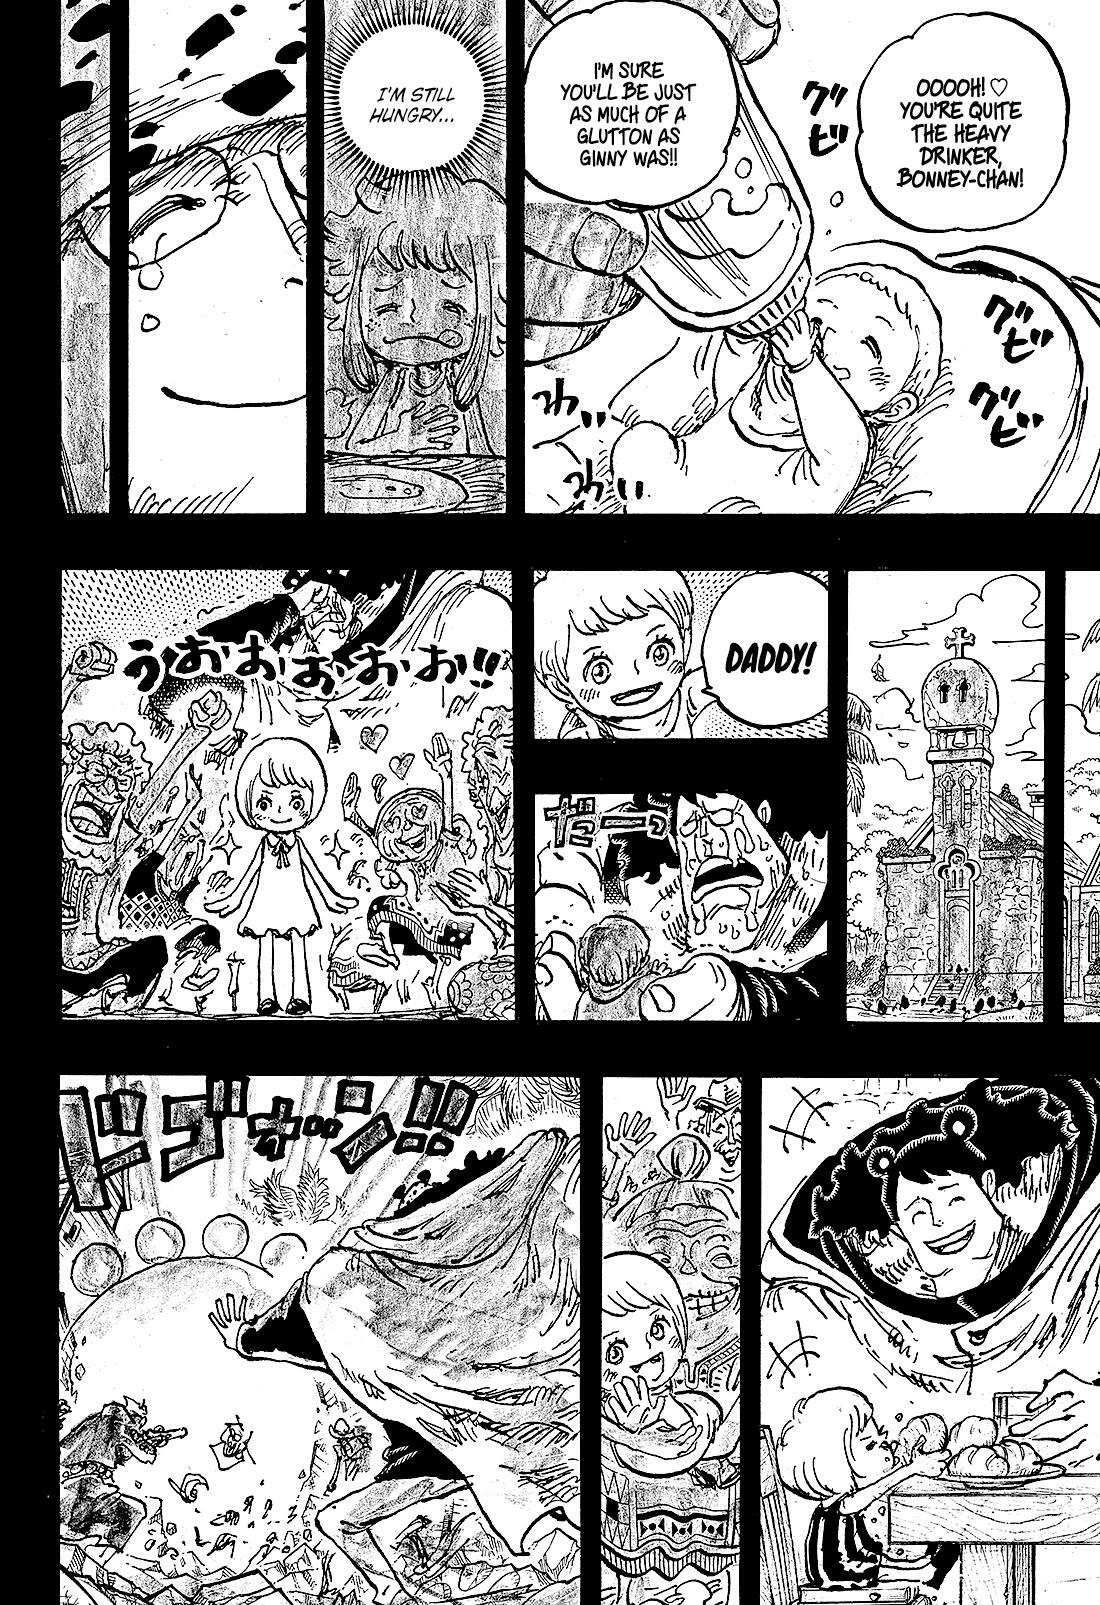 Read One Piece Chapter 1098: The Birth Of Bonney - Manganelo